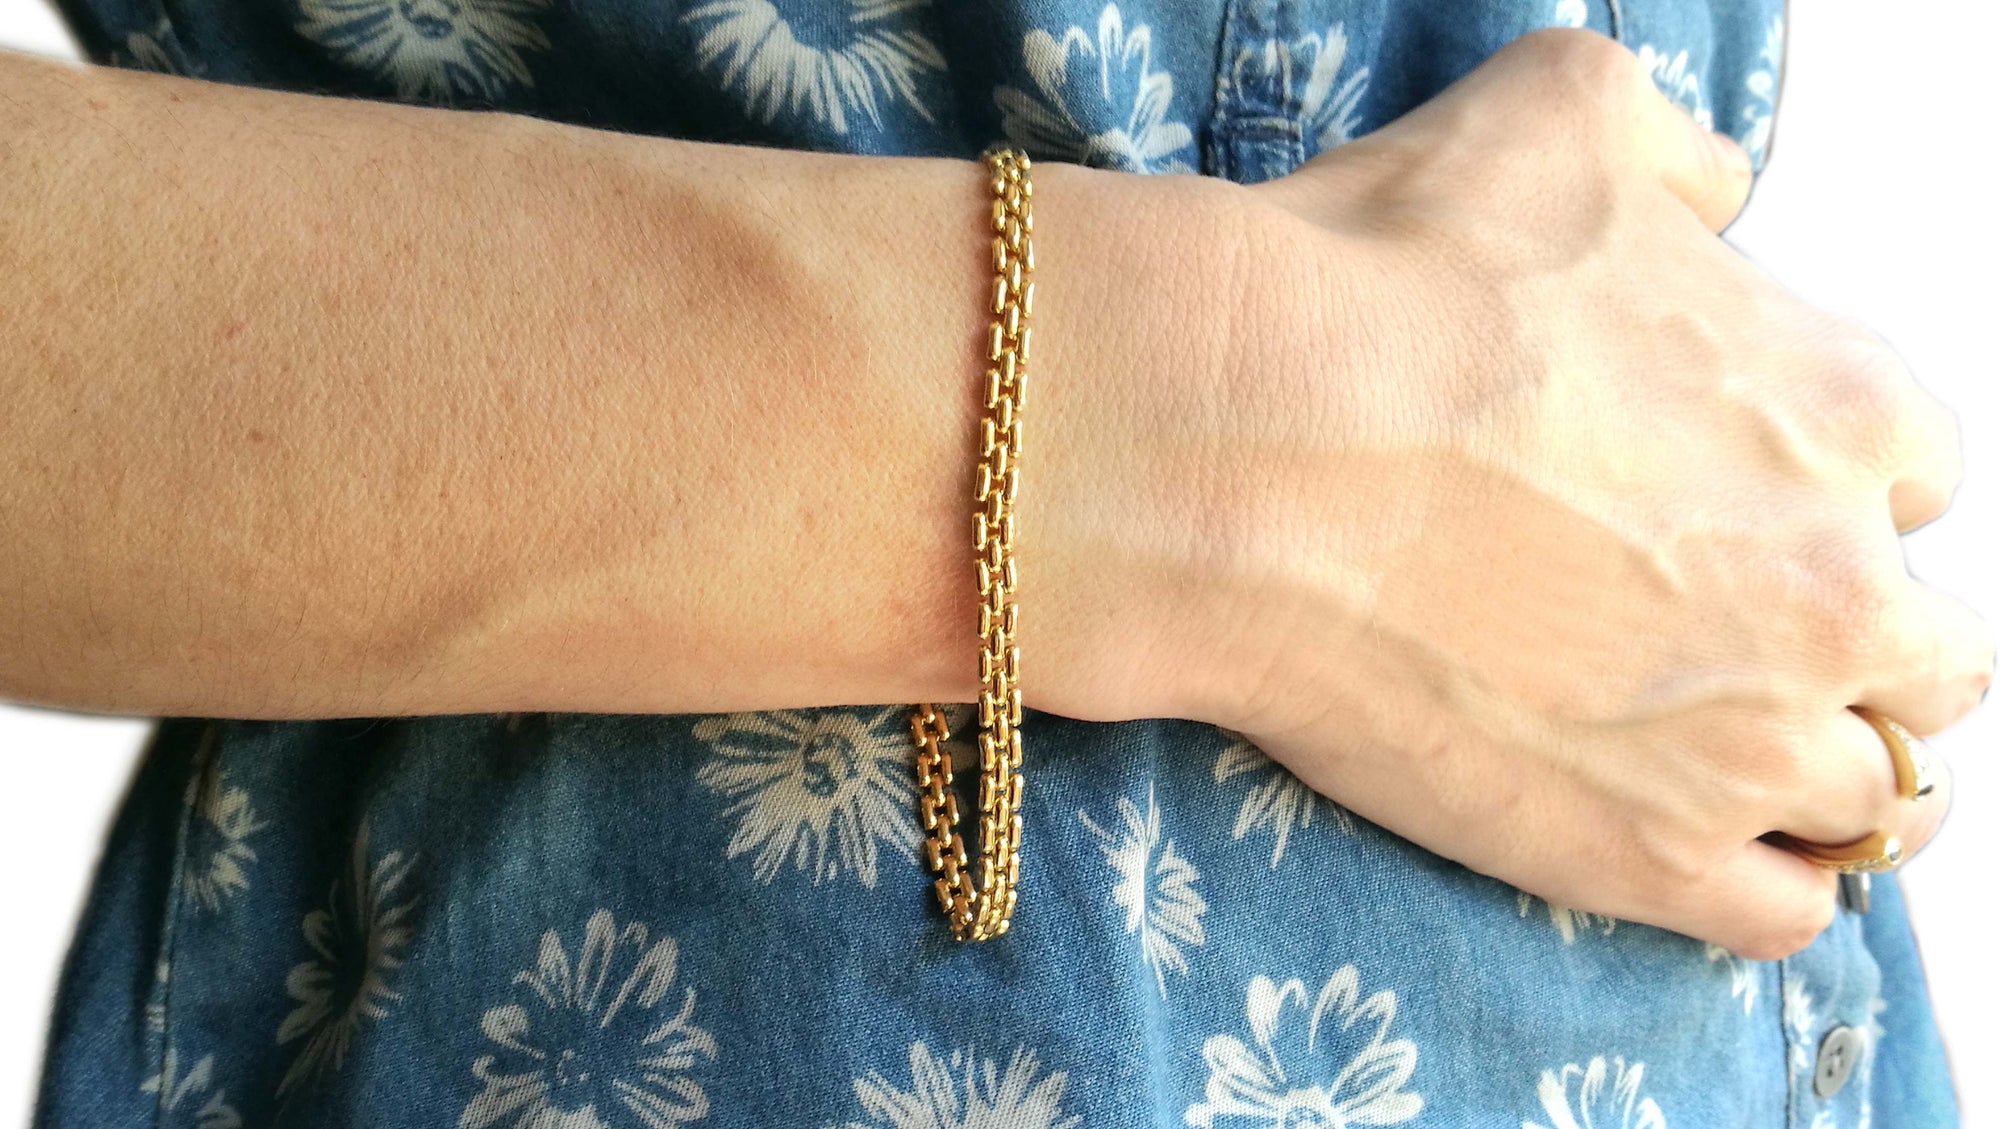 Cartier Maillon Panthere Bracelet in 18k Yellow Gold